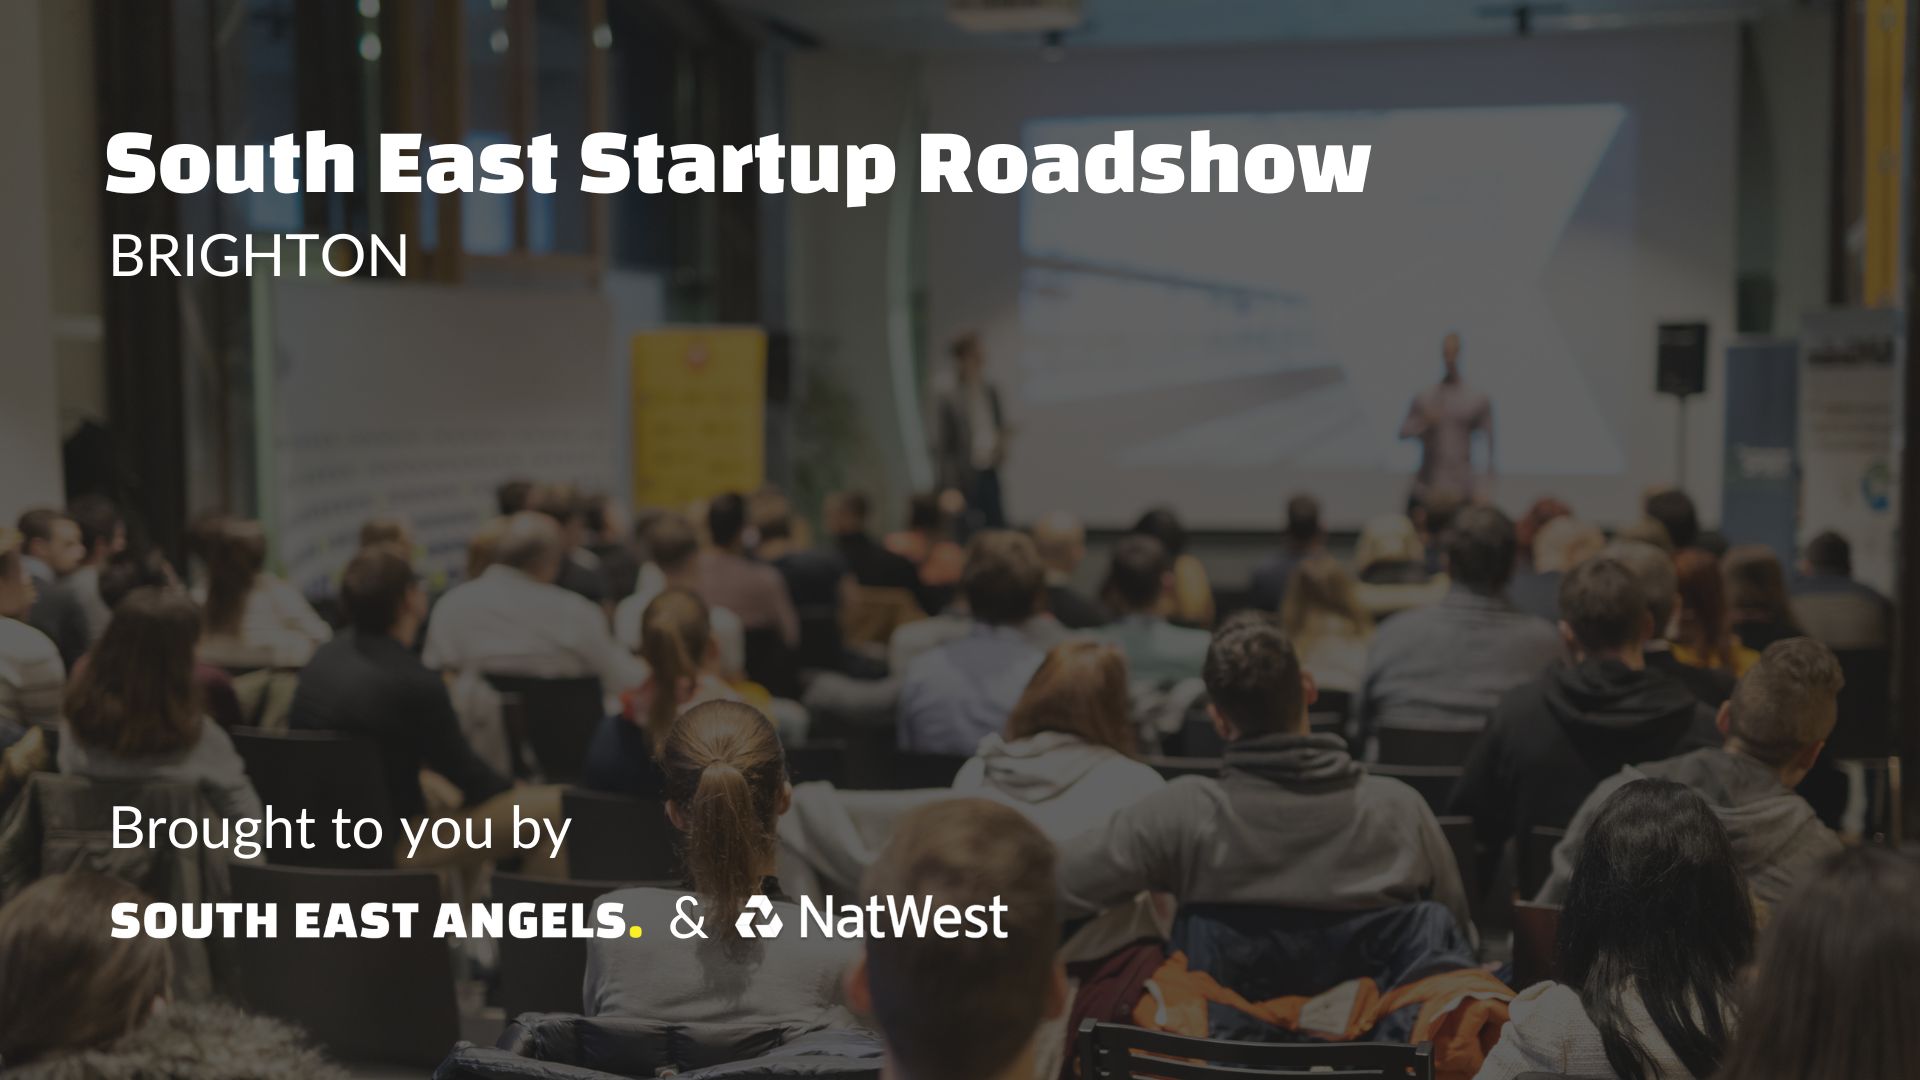 South East Startup Roadshow